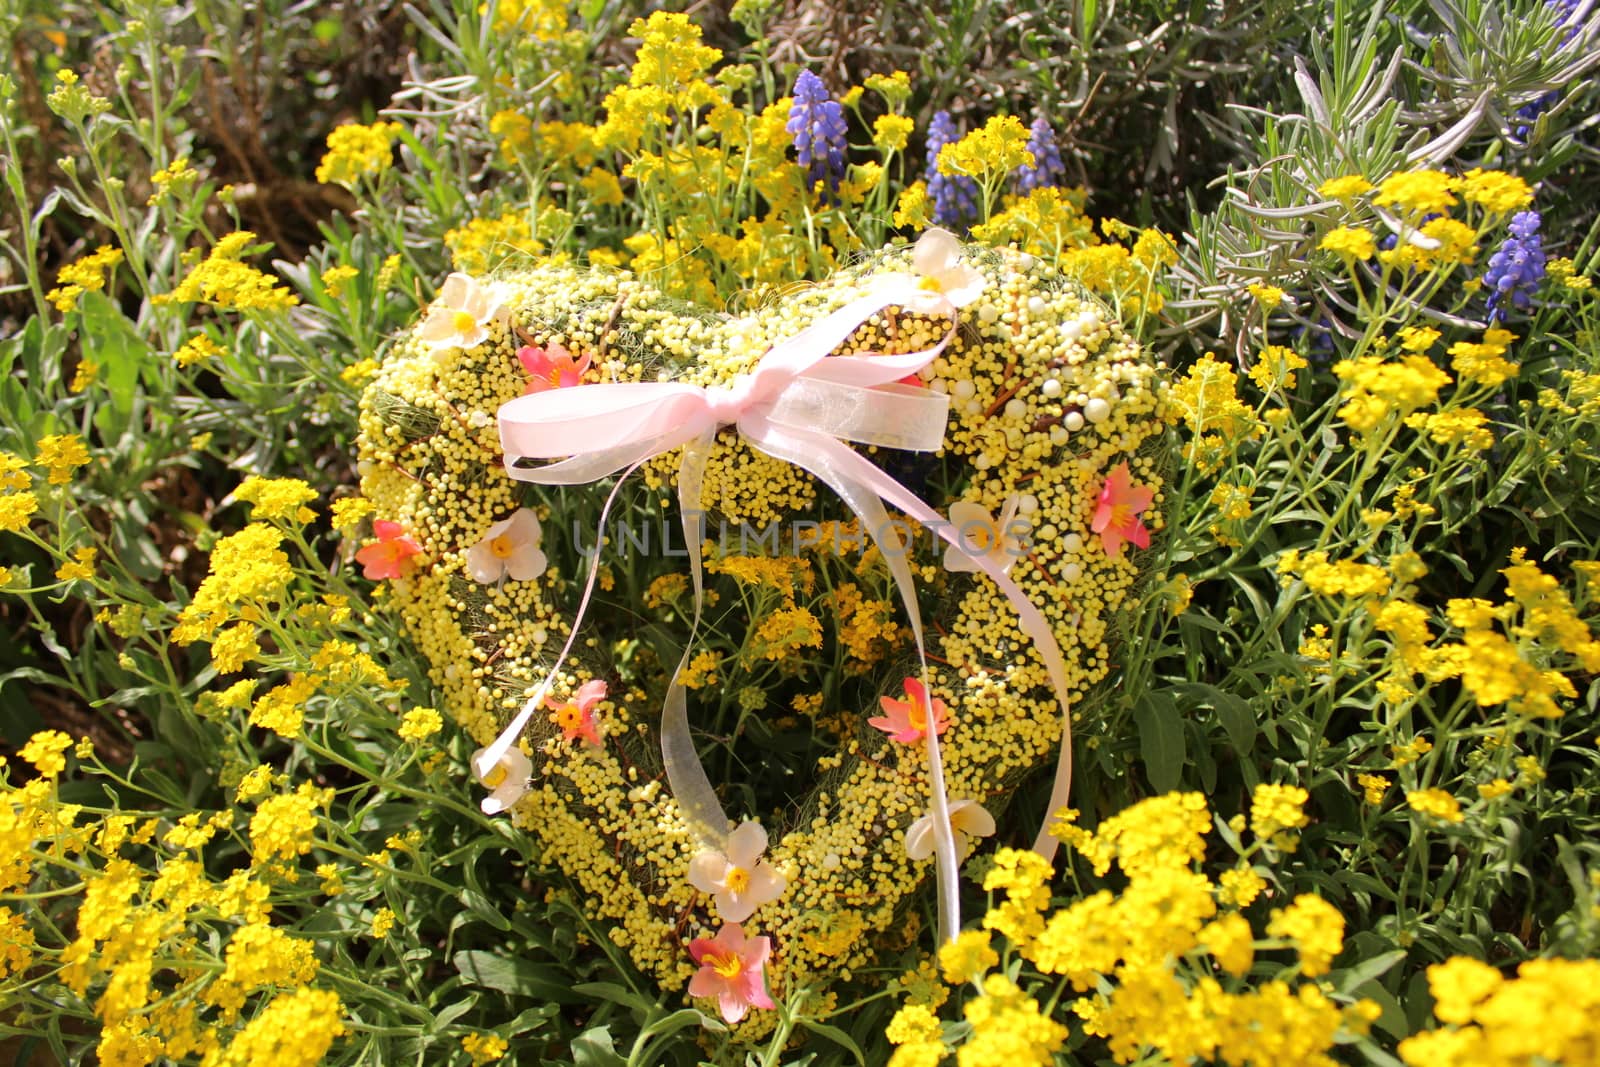 The picture shows a romantic heart in spring flowers.